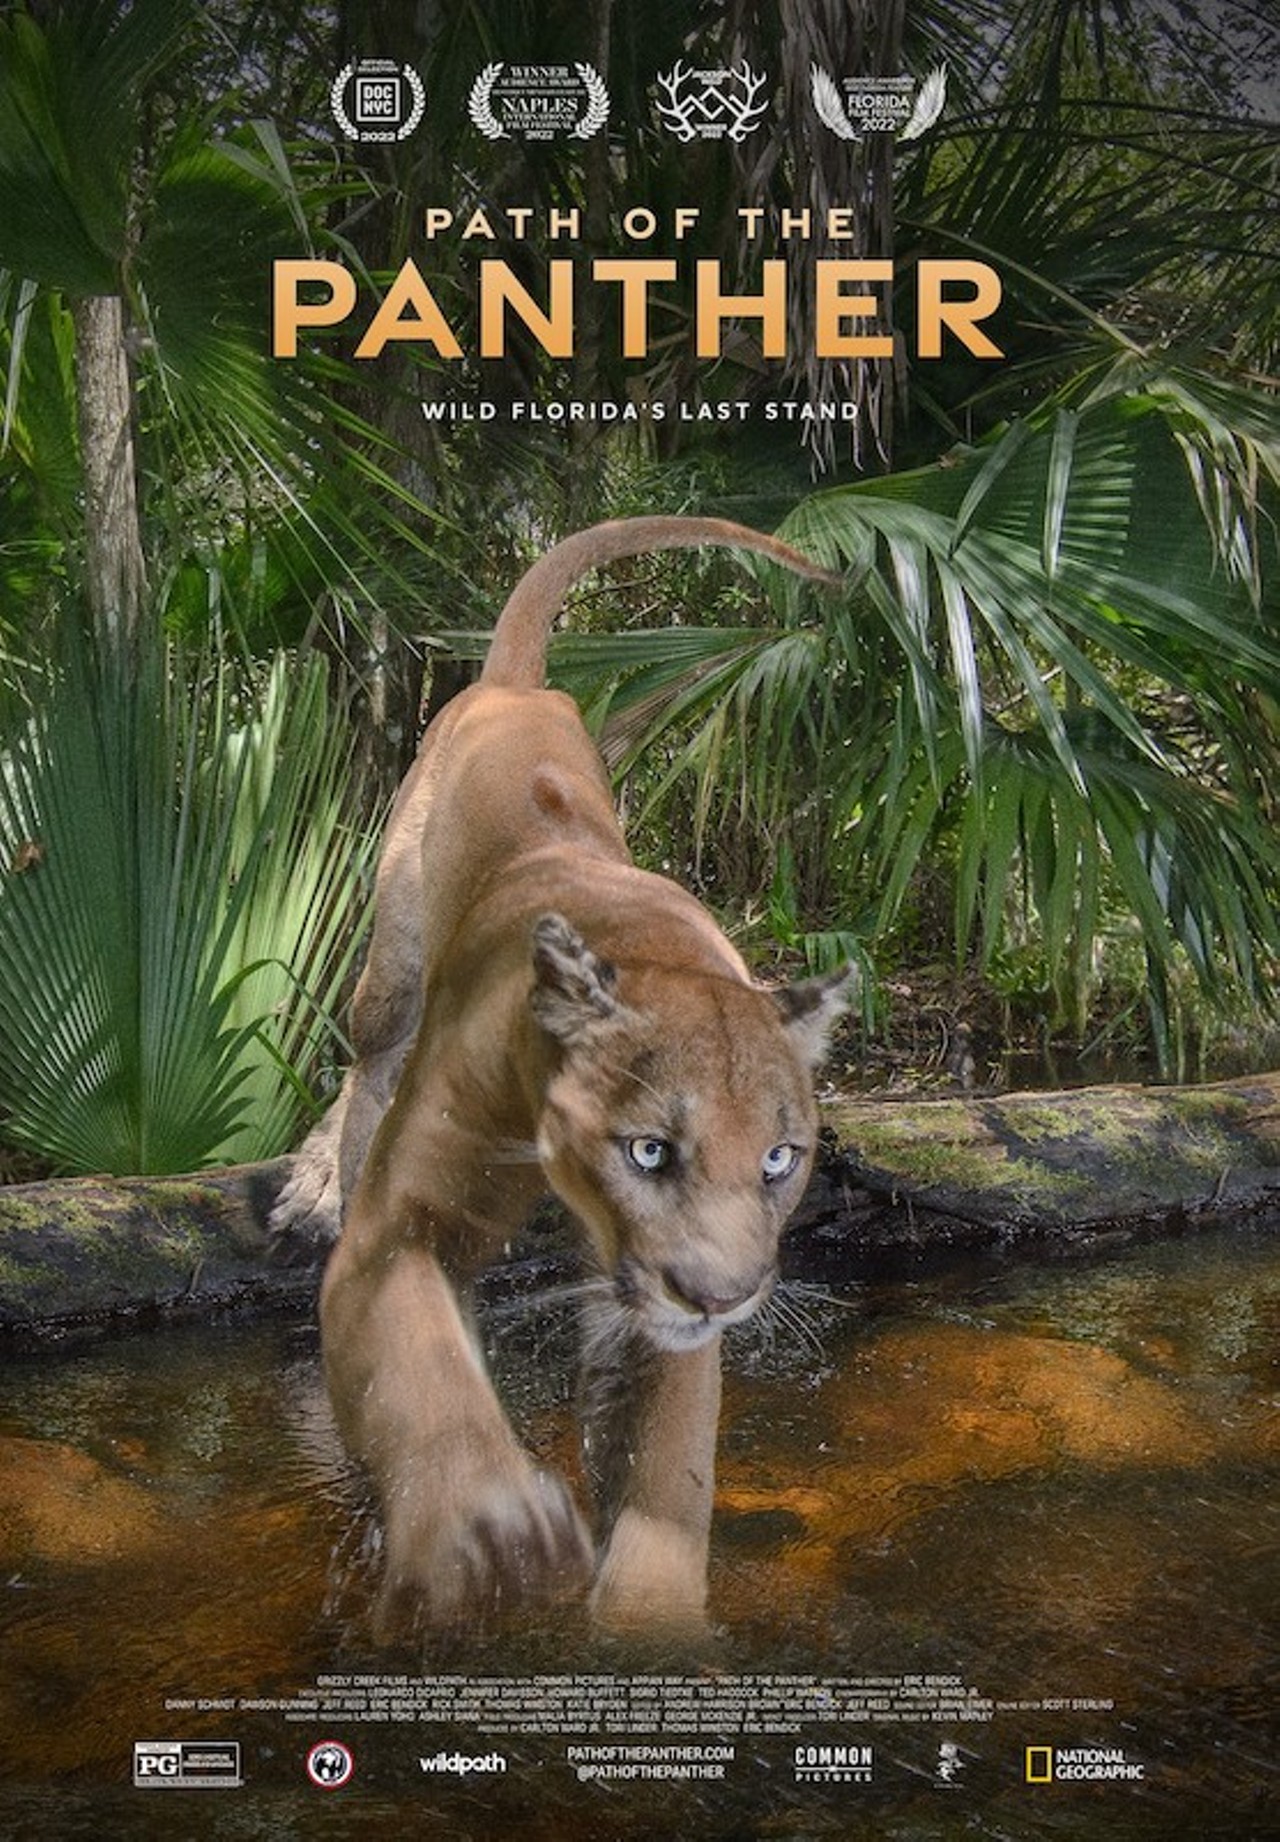 "Path of the Panther"